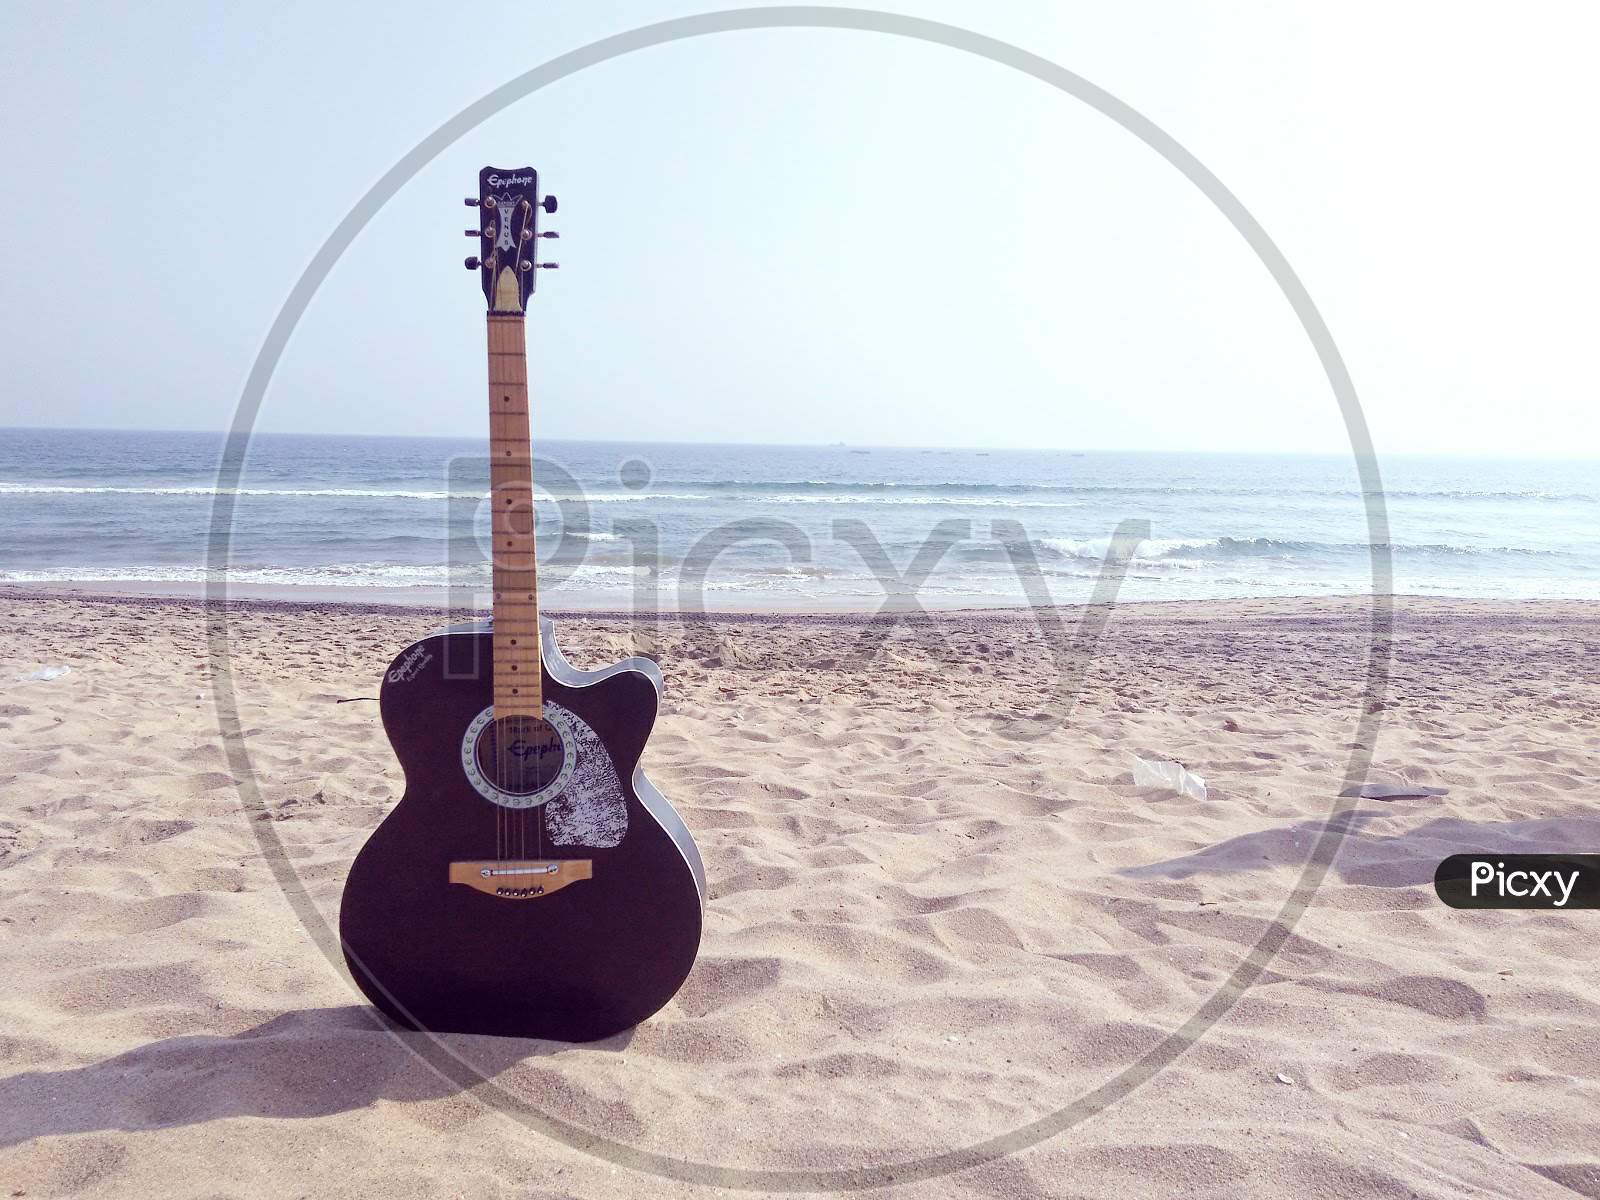 Guitar on a Beach With Sea in Background